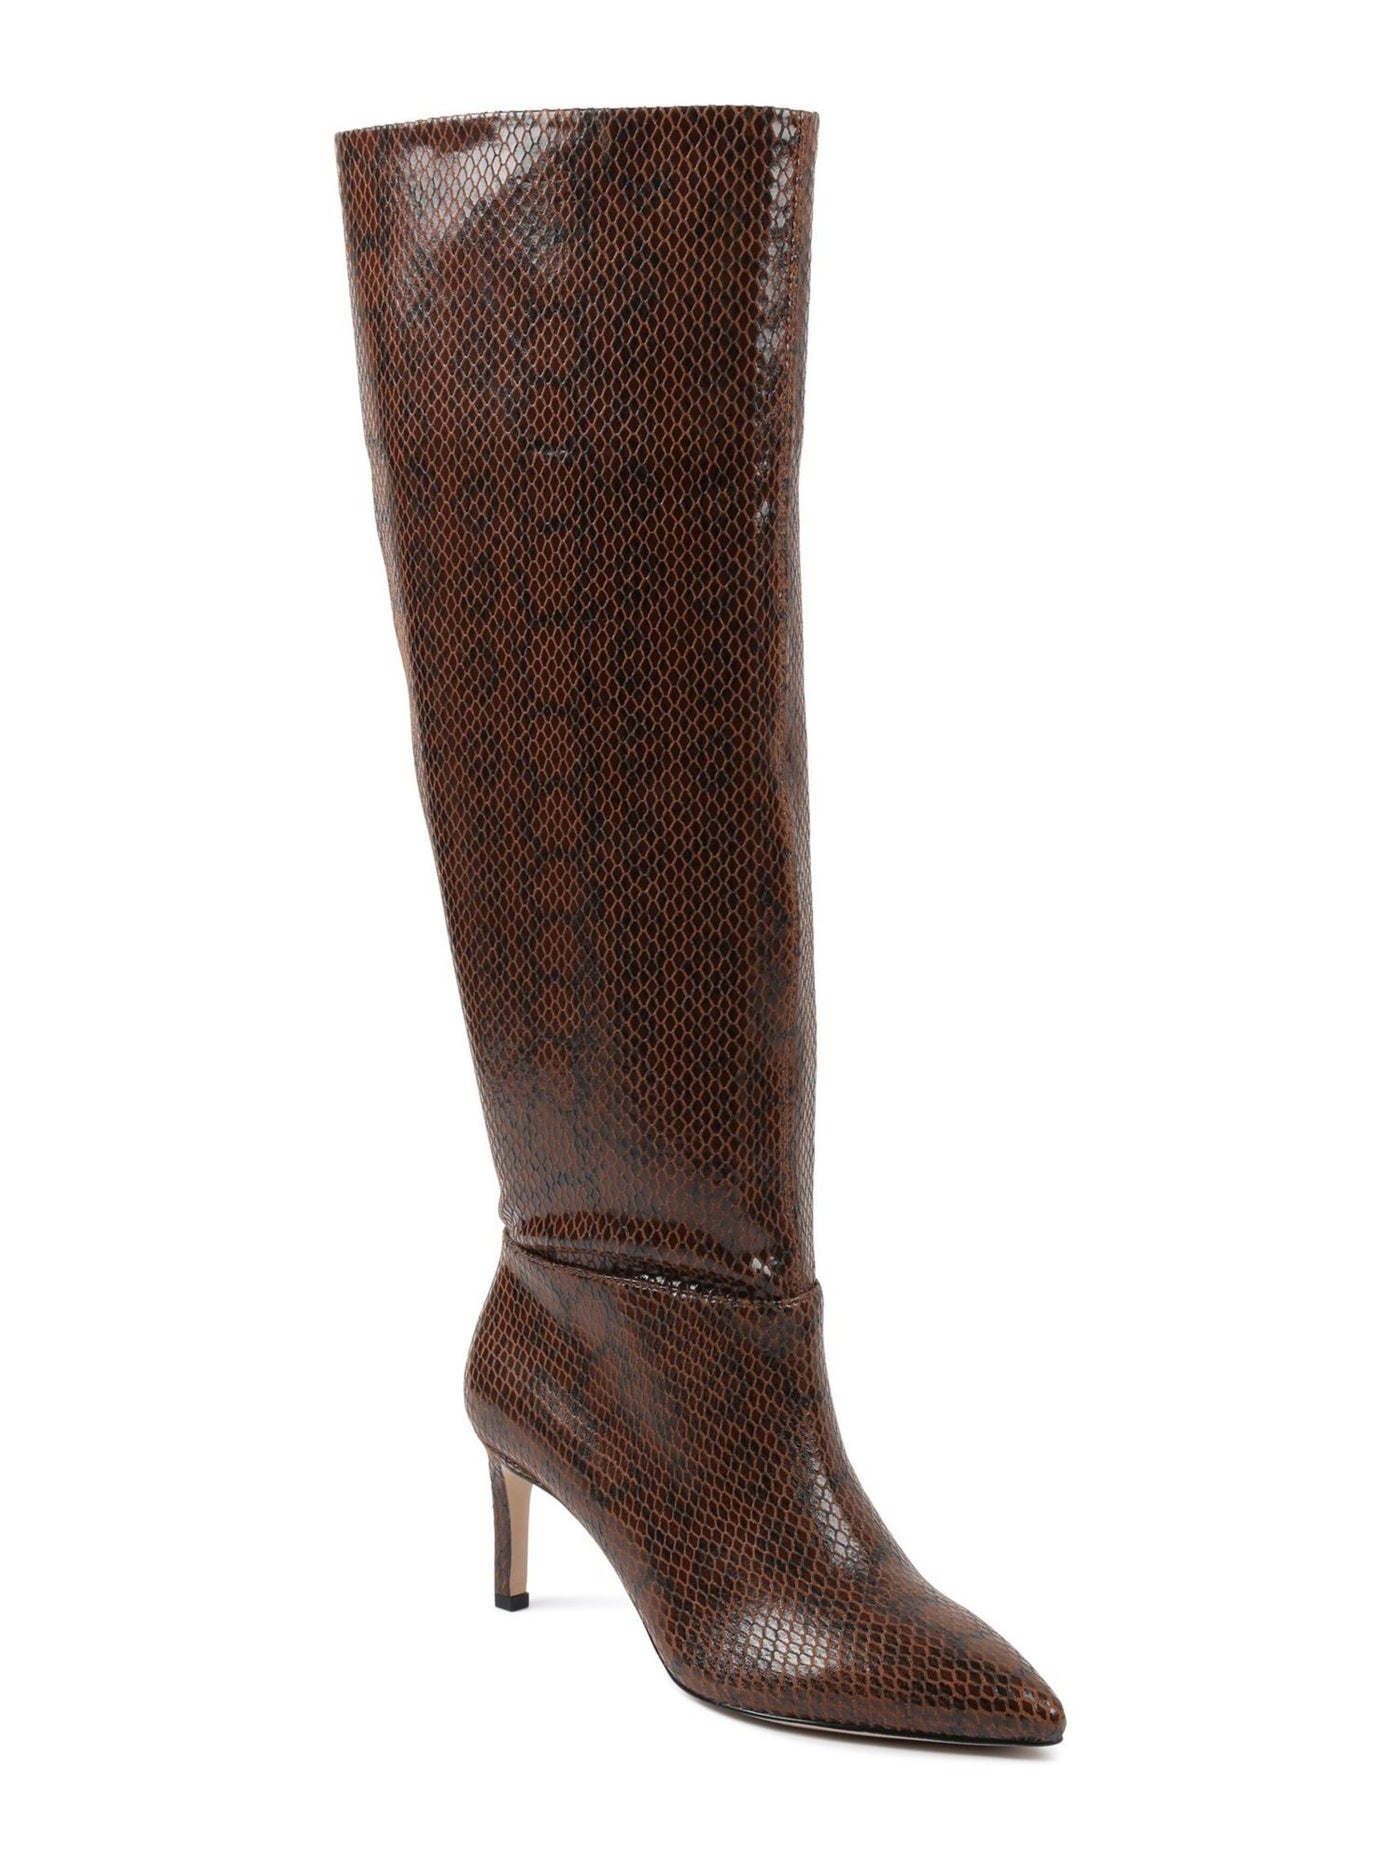 BCBGENERATION Womens Brown Animal Print Pointed Toe Stiletto Dress Boots 11